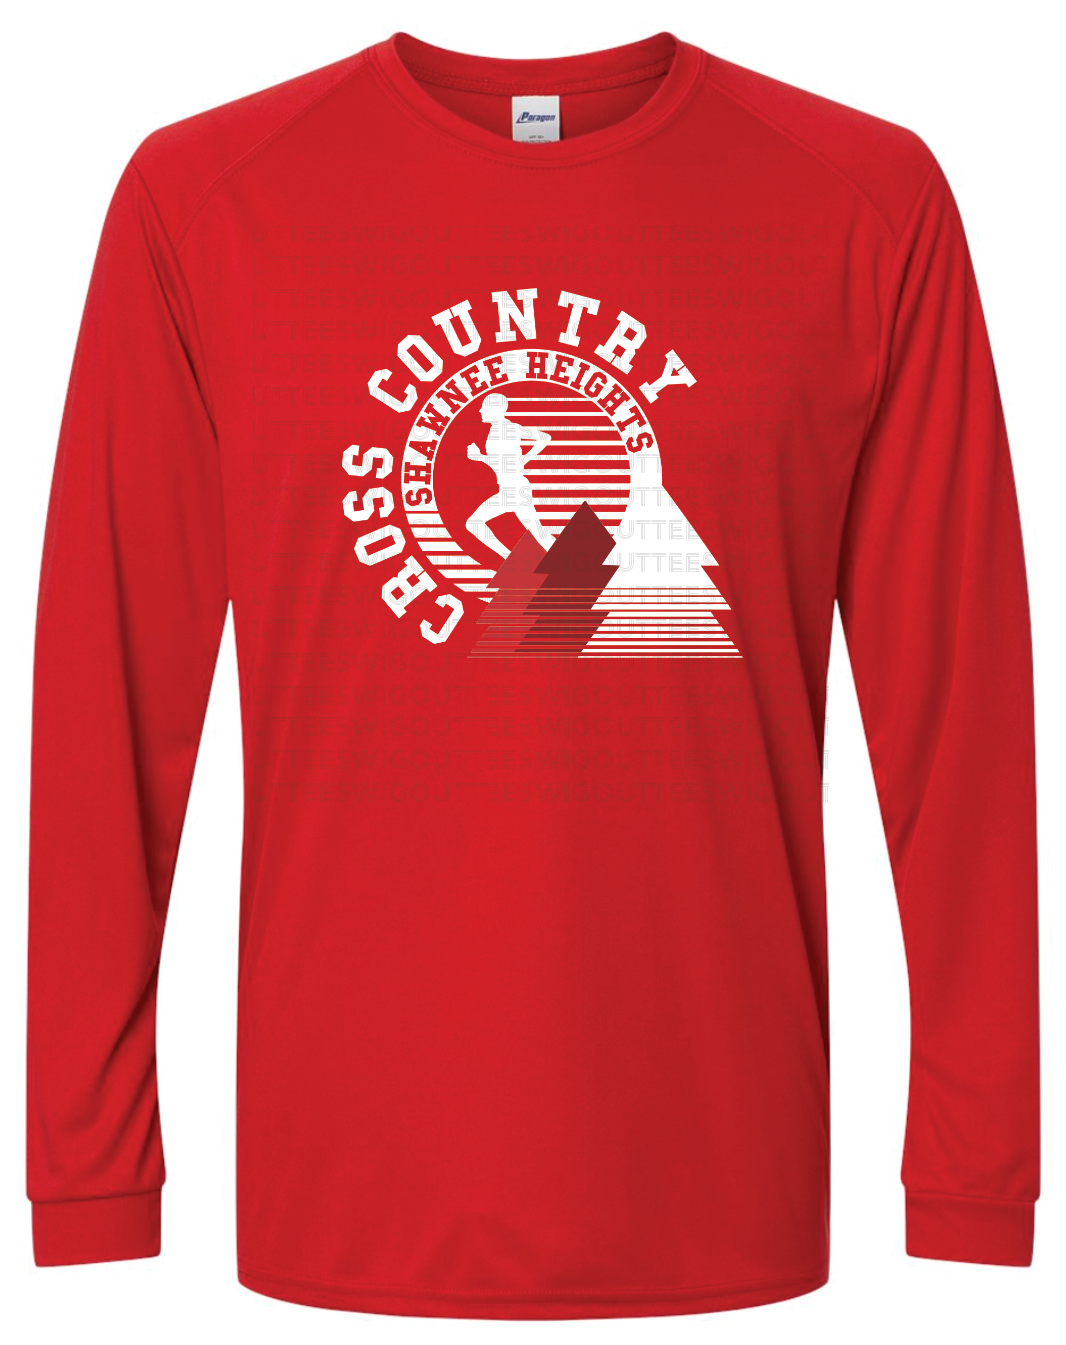 Cross Country Paragon Performance Long Sleeve T-shirt